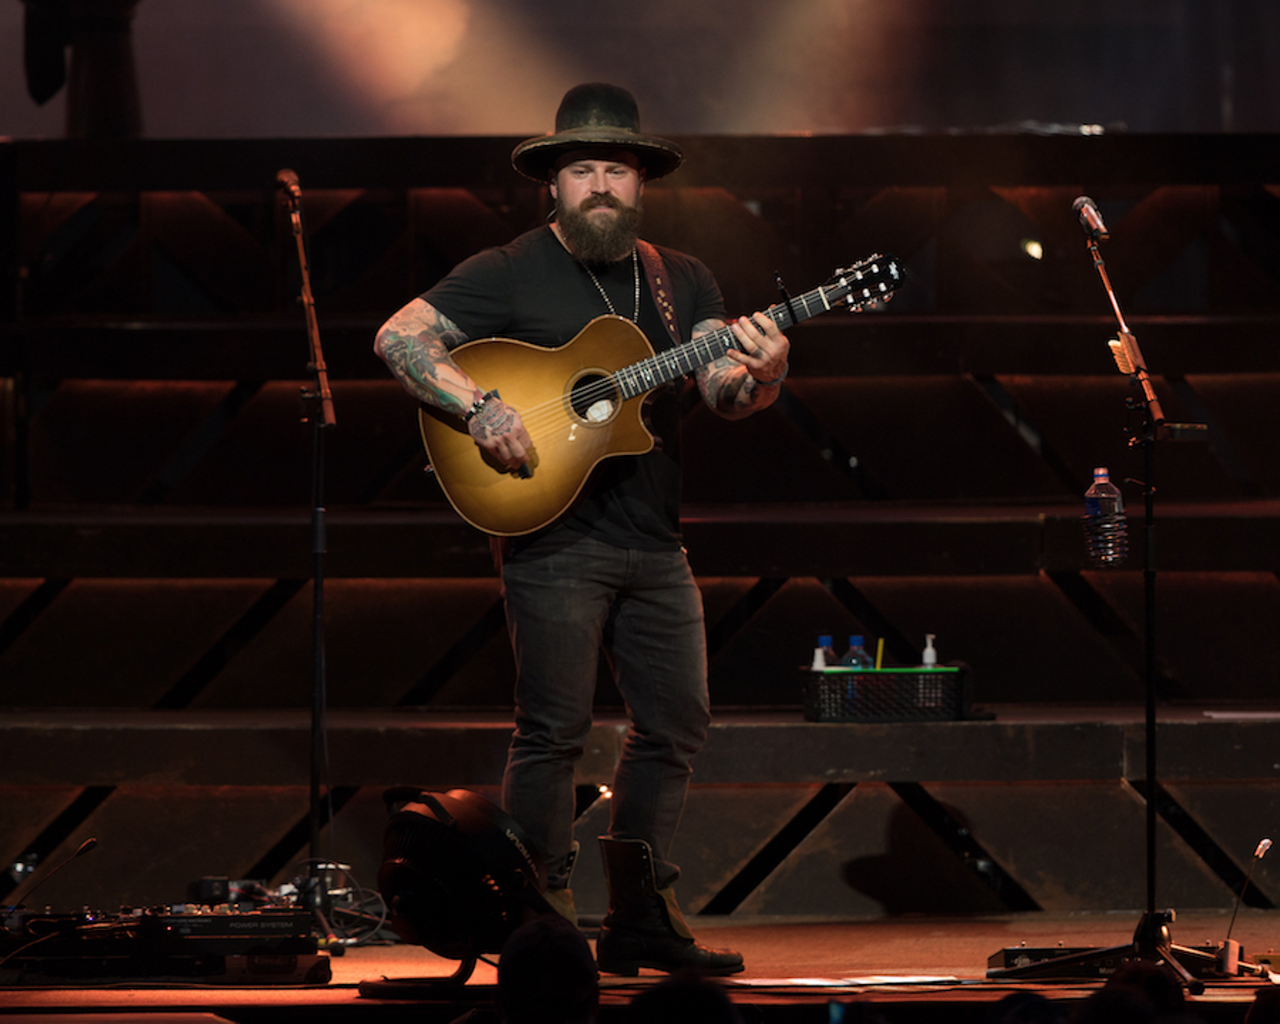 Zac Brown Band plays MidFlorida Credit Union Amphitheatre in Tampa, Florida on September 25, 2017.